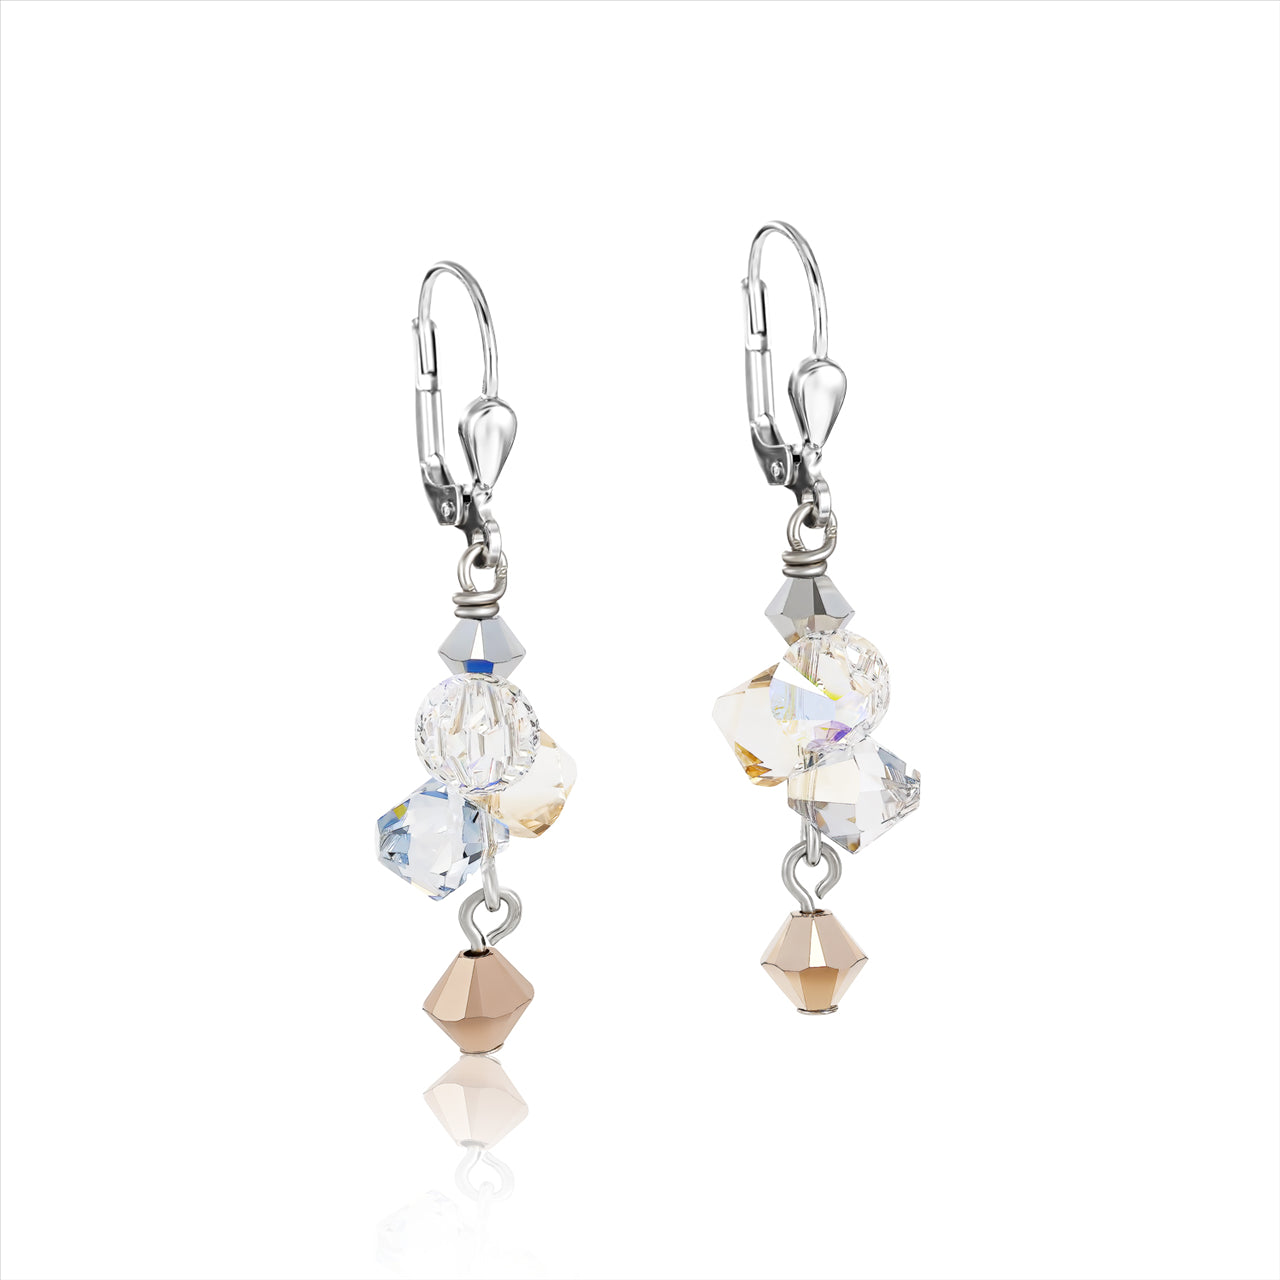 Earrings - CDL - stainless steel with rose gold crystals & champagne coloured Swarovski crystals with sterling silver fittings